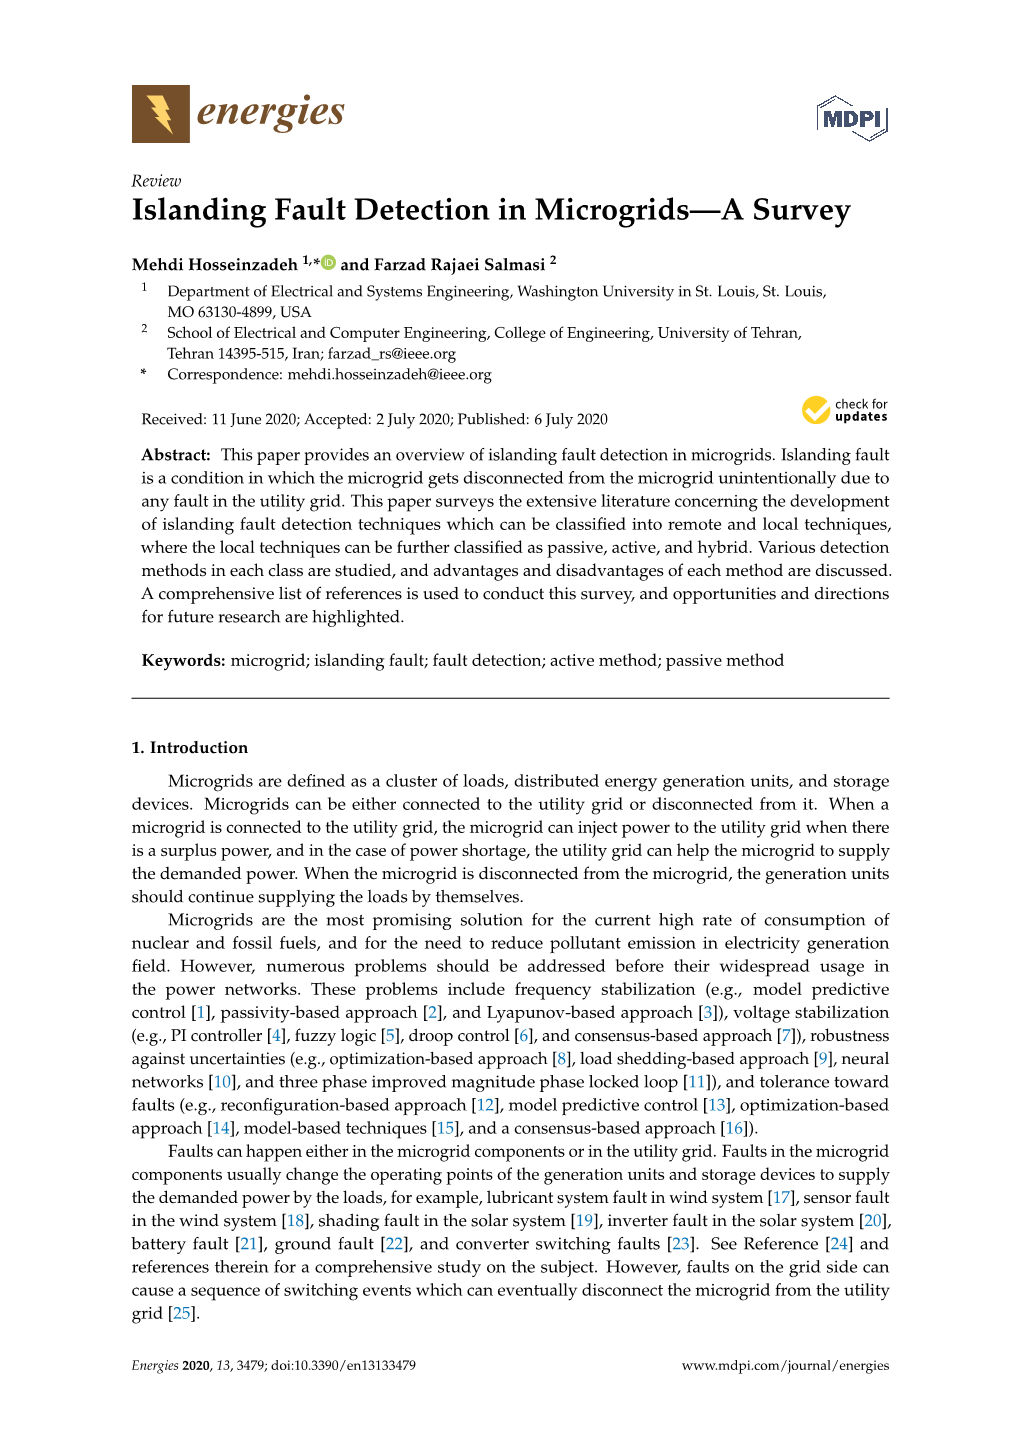 Islanding Fault Detection in Microgrids—A Survey